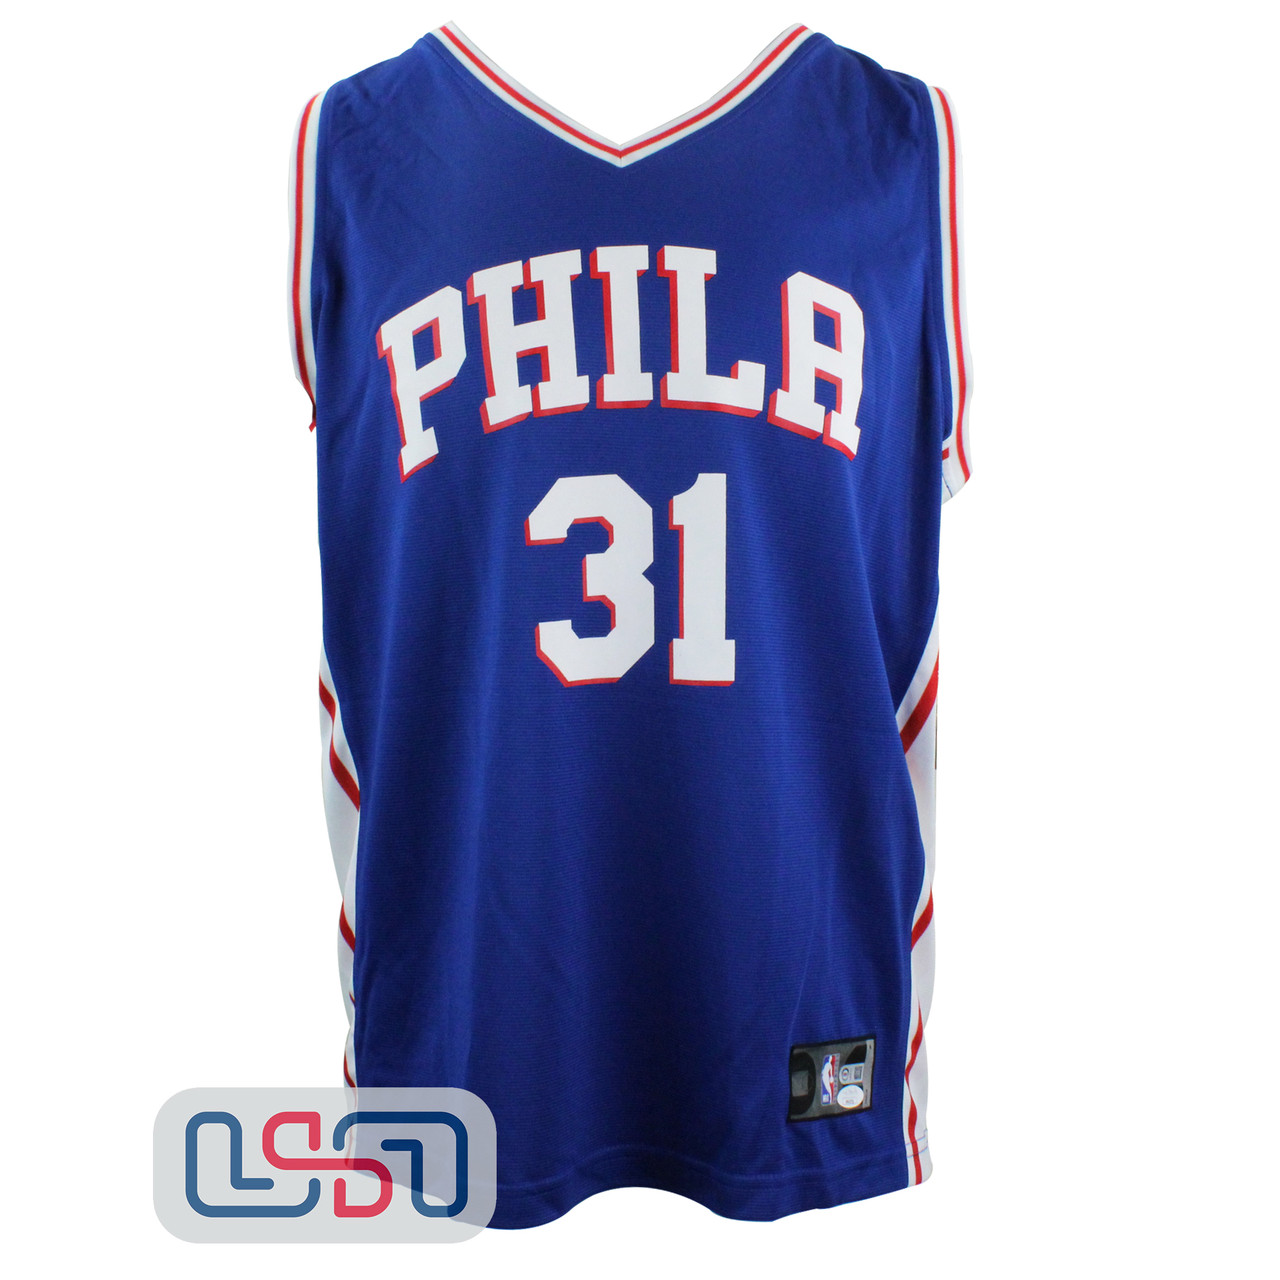 Seth Curry Signed Philadelphia 76ers Jersey Inscribed "Go